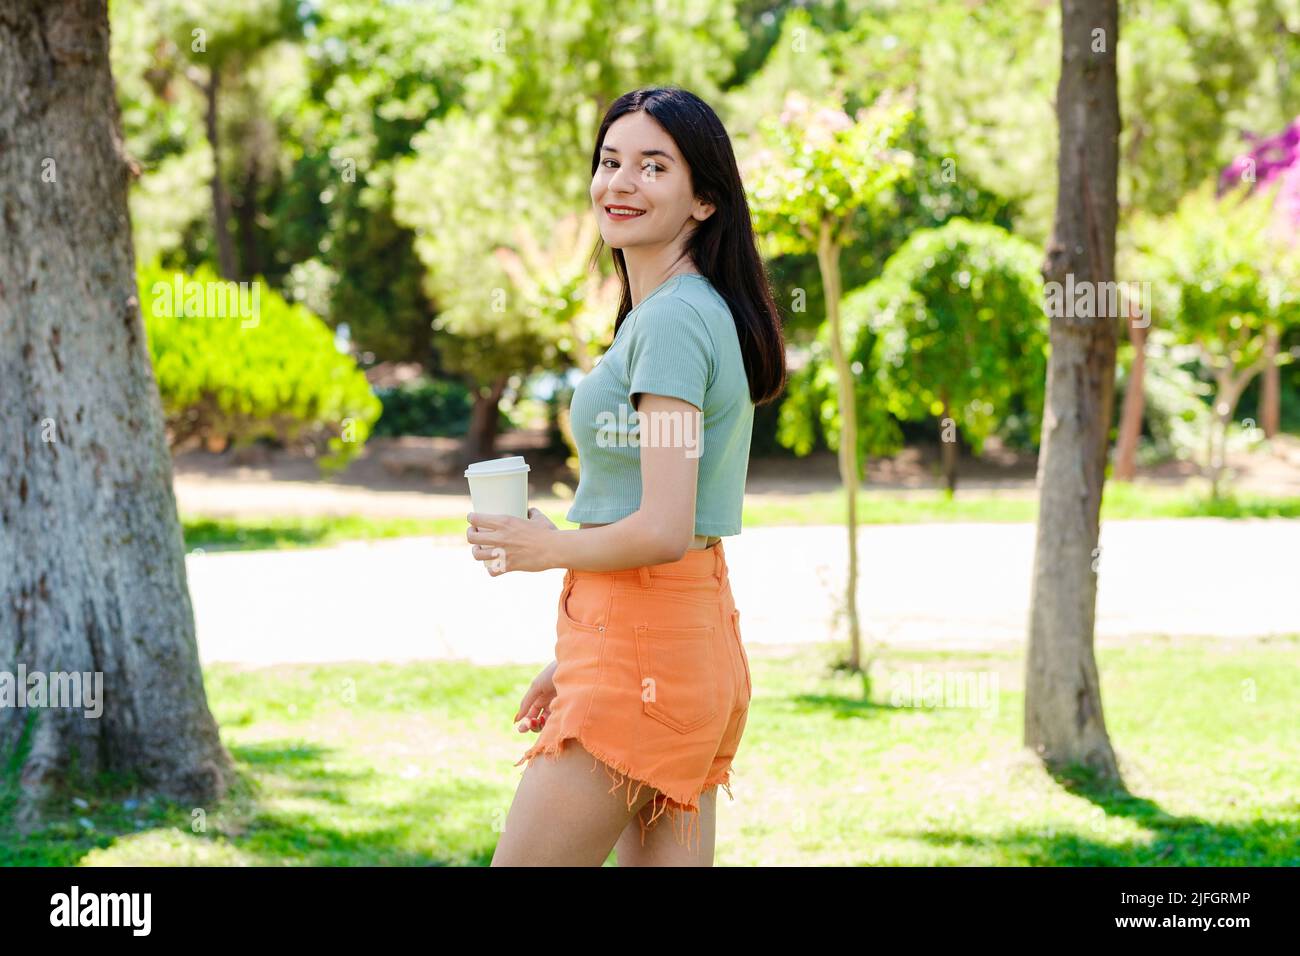 Portrait of cheerful woman wearing turquoise tee on city park, outdoors posing and looking at the camera while holding a takeaway cup of coffee. Stock Photo